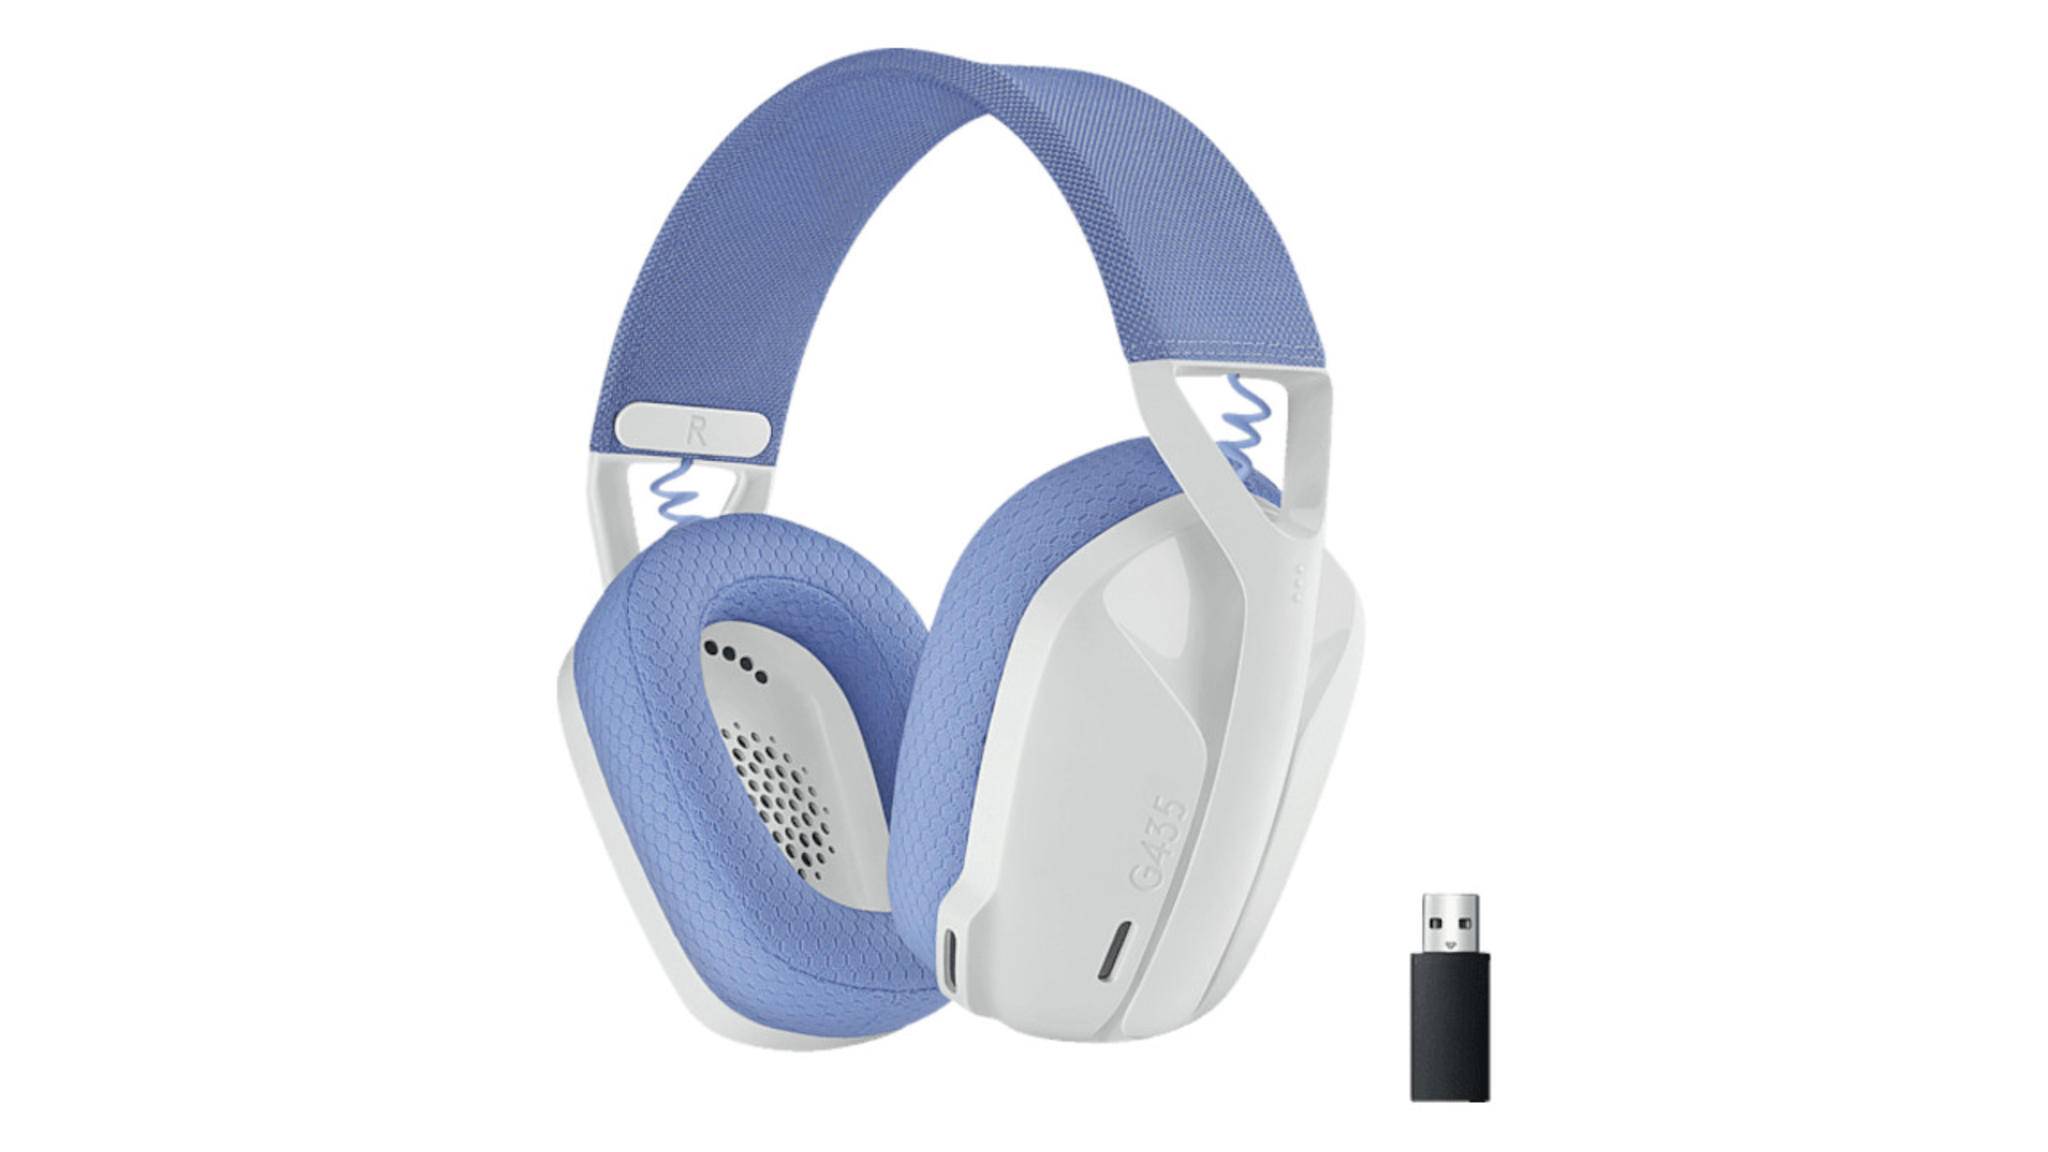 The G435 is available in different optics.  White/blue, blue/pink and black are available.